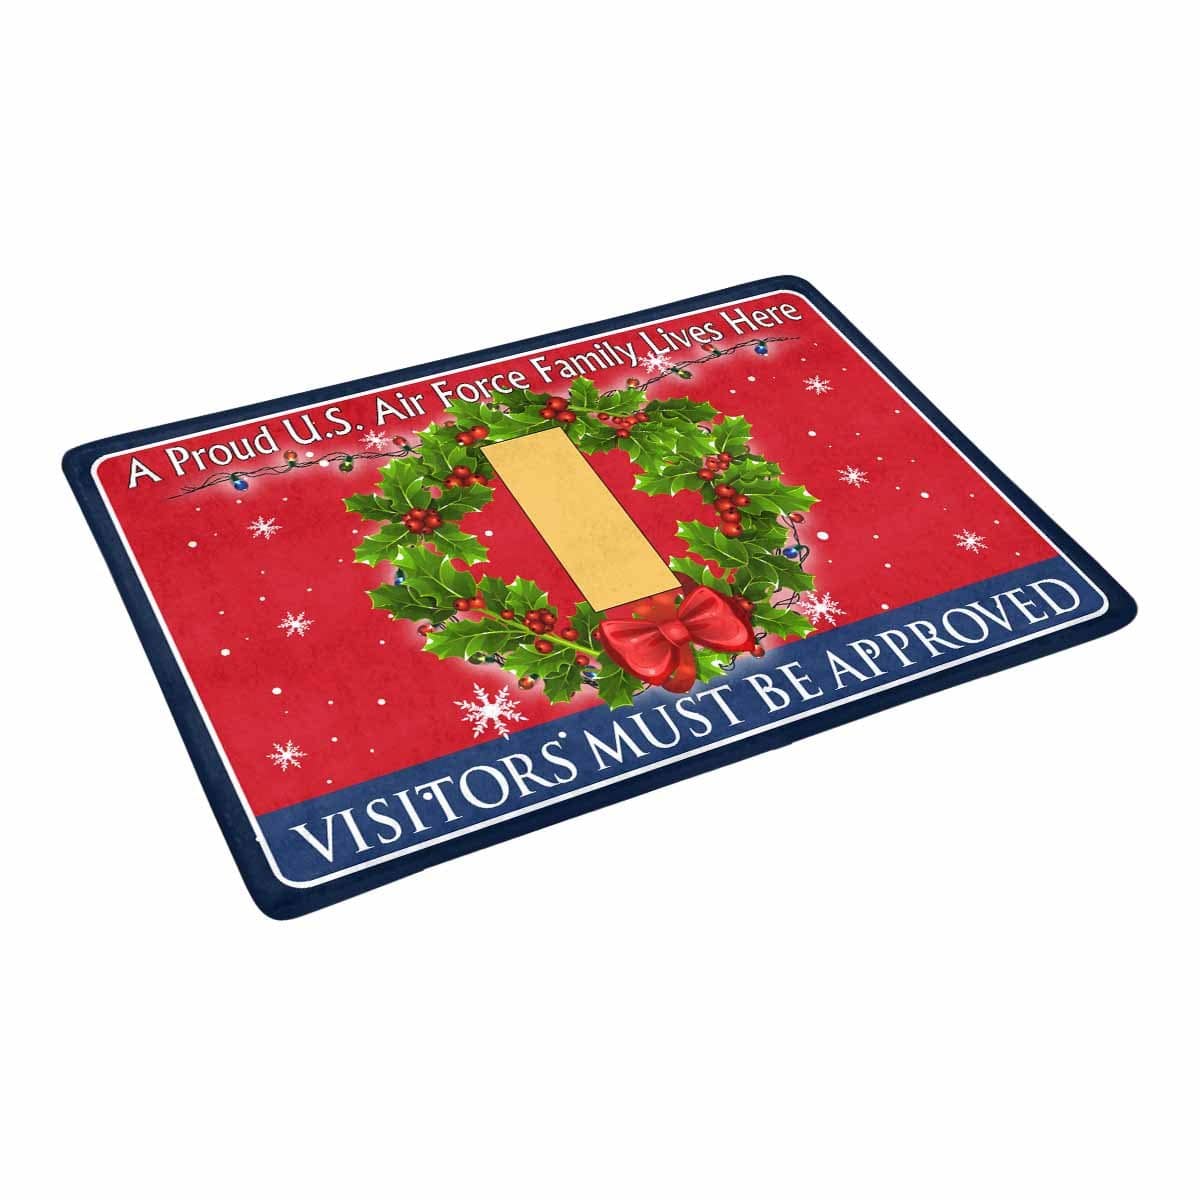 US Air Force O-1 Second Lieutenant 2d Lt O1 Commissioned Officer Ranks - Visitors must be approved - Christmas Doormat-Doormat-USAF-Ranks-Veterans Nation